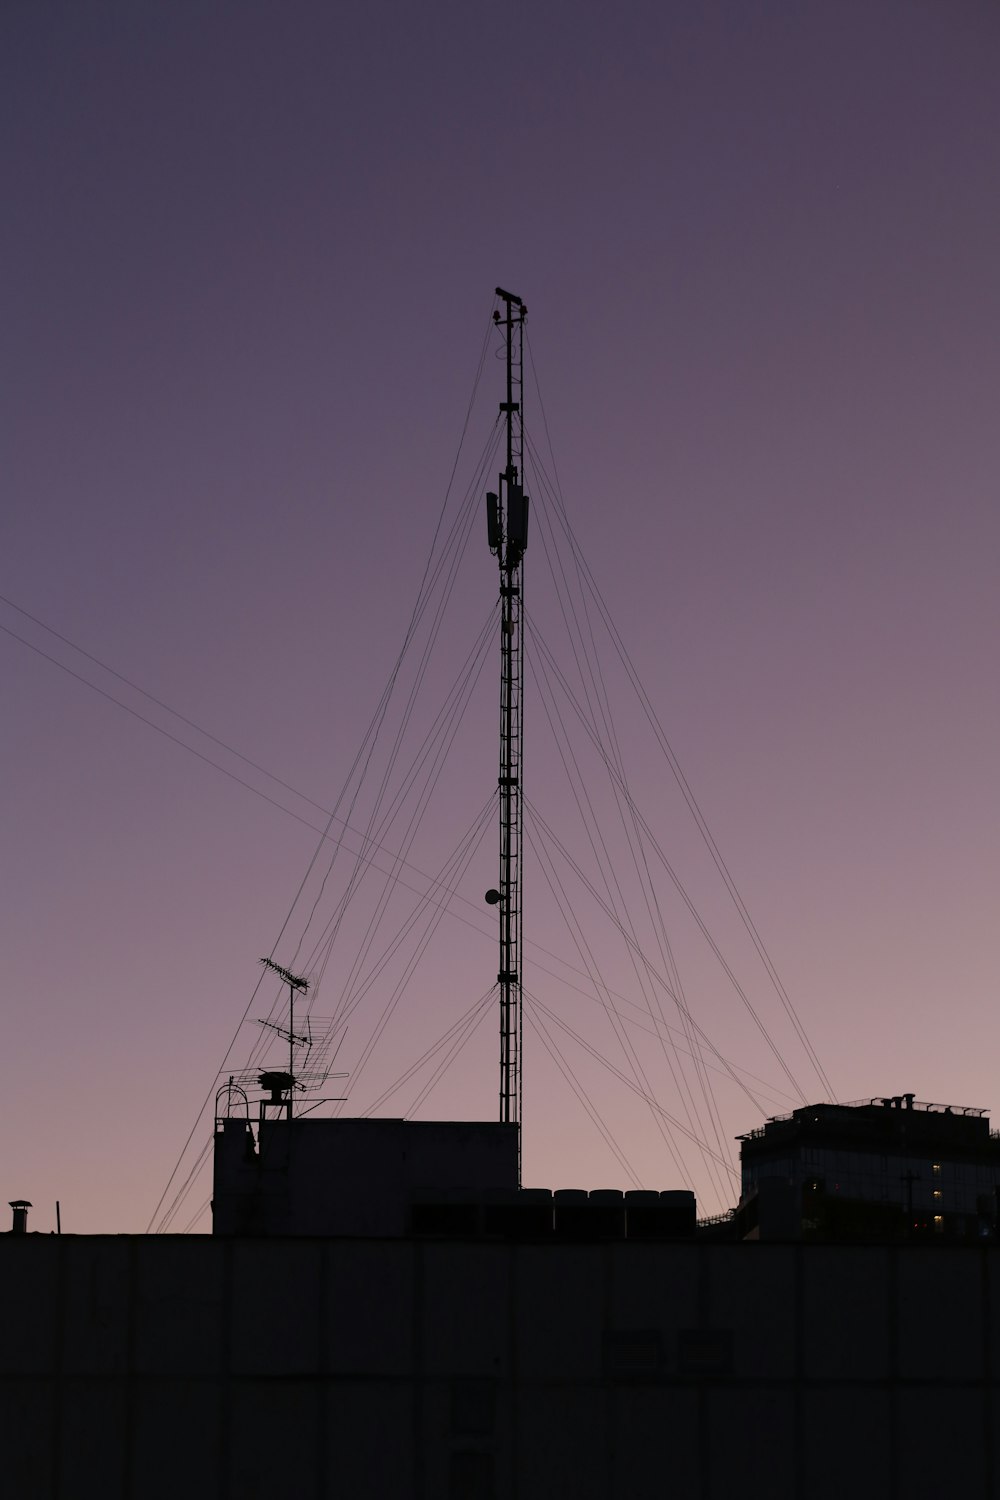 the silhouette of a building with a radio tower in the background